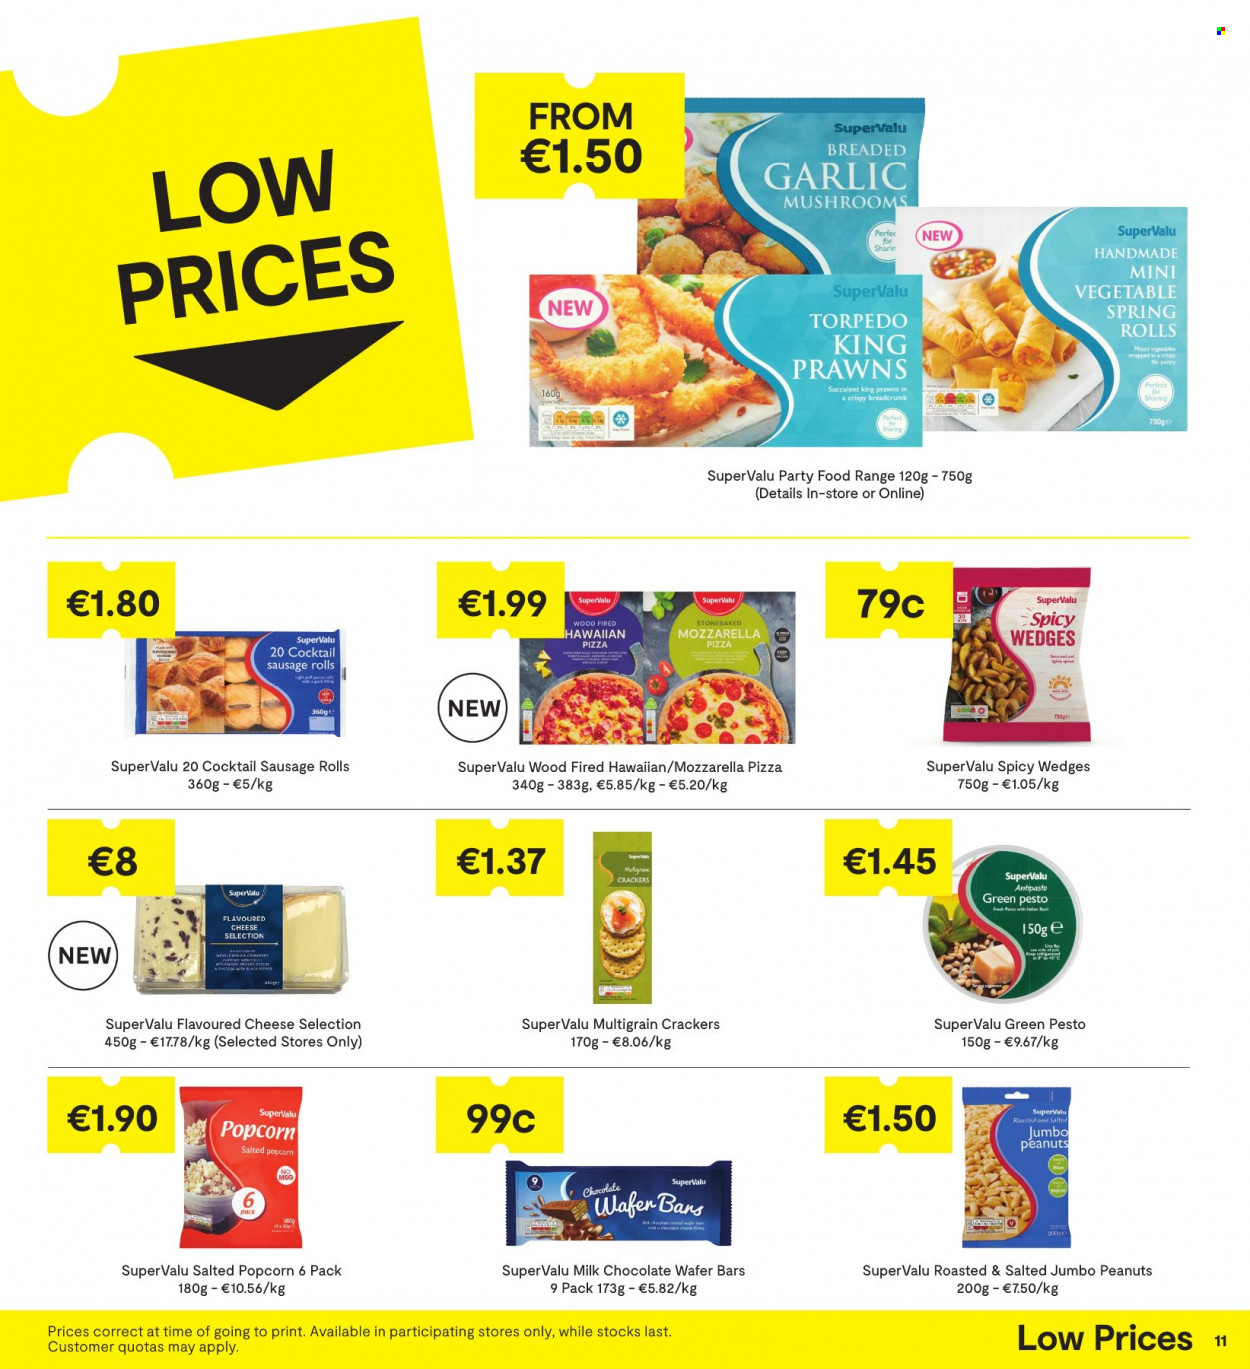 thumbnail - SuperValu offer  - 21.10.2021 - 03.11.2021 - Sales products - sausage rolls, garlic, prawns, pizza, spring rolls, sausage, milk chocolate, wafers, chocolate, crackers, popcorn, pesto, peanuts. Page 11.